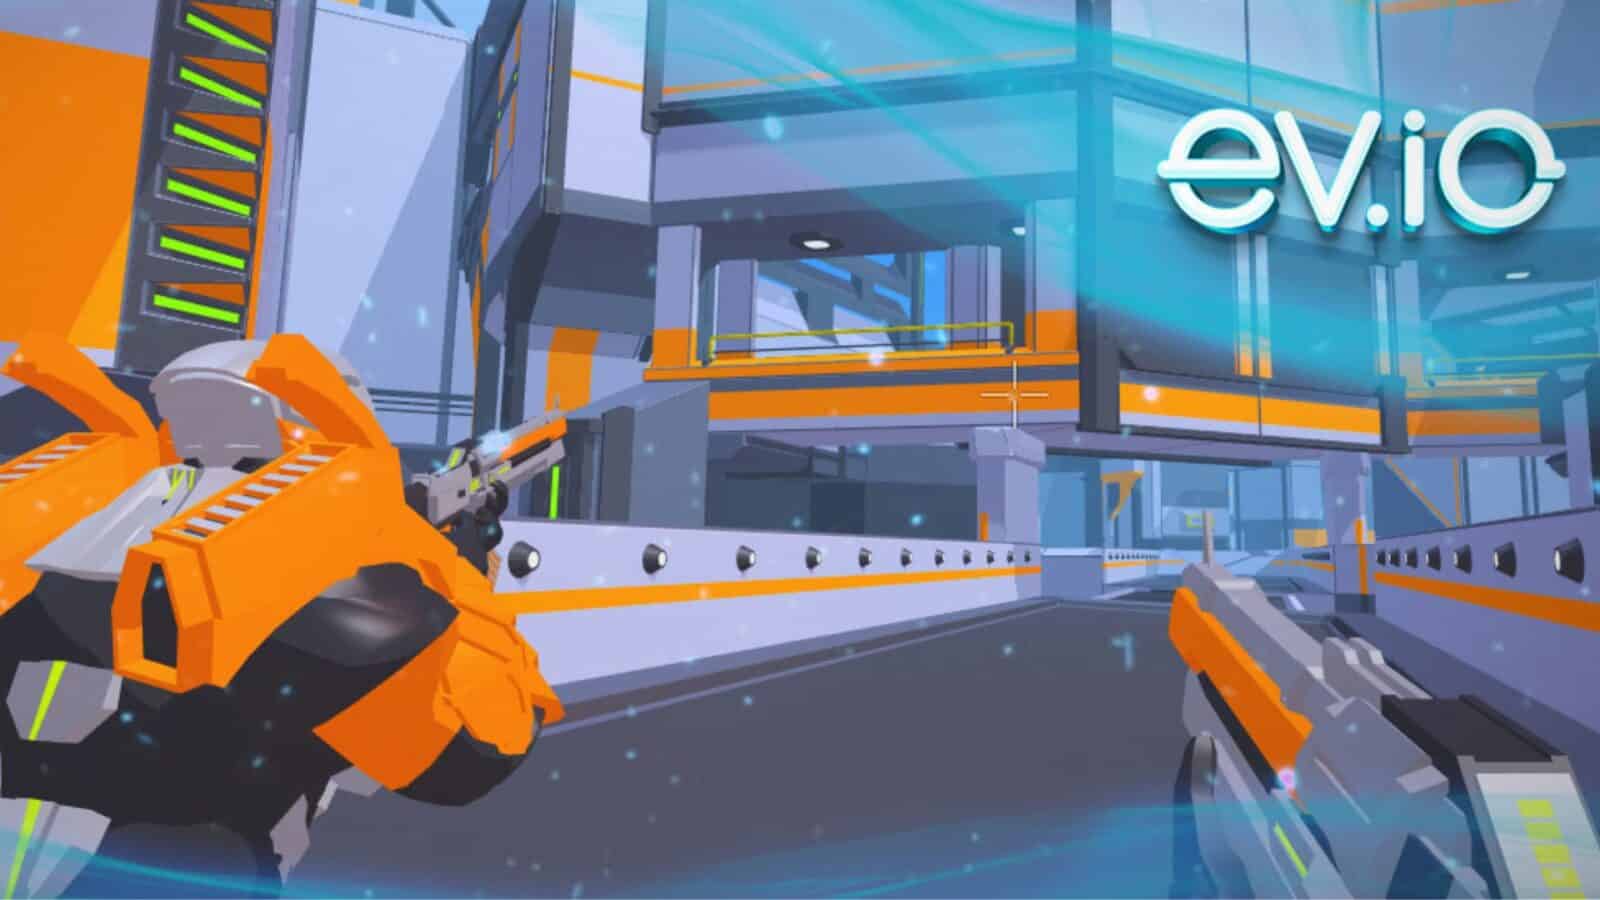 Famous blockchain-based shooter ev.io is now available on all mobile devices, as per an official tweet announcement.